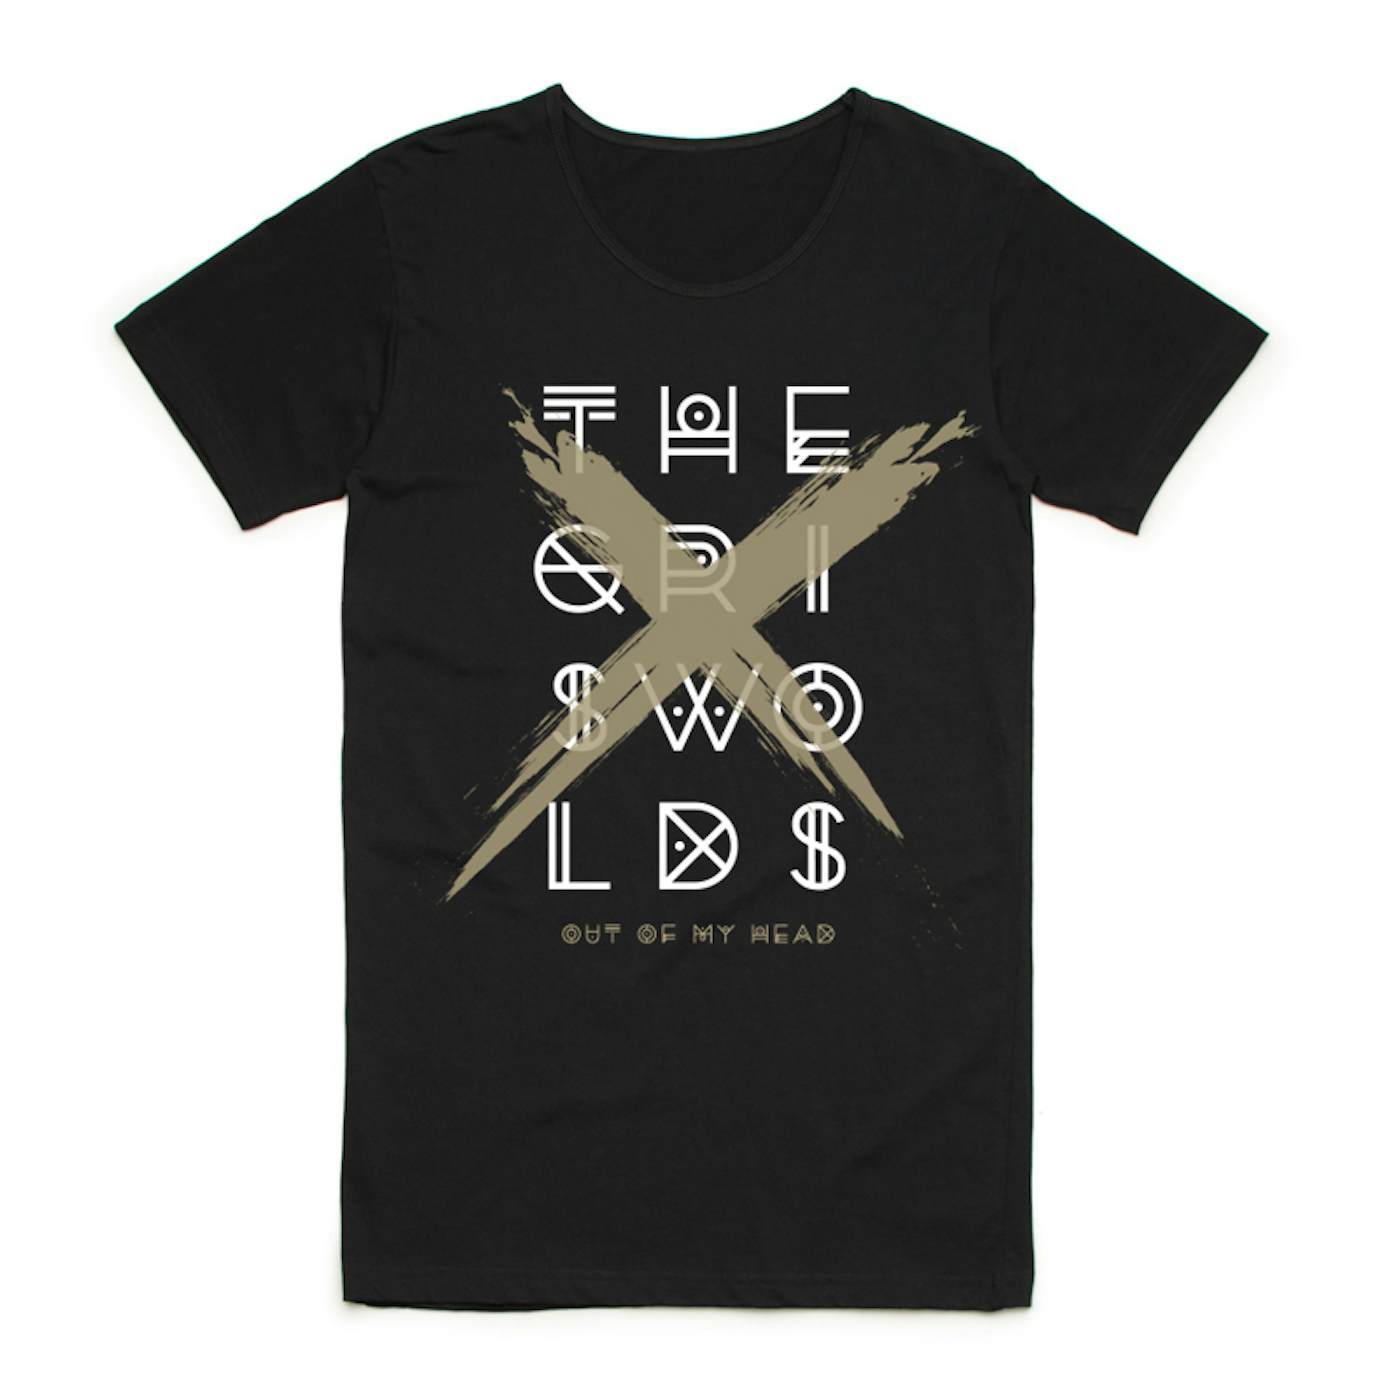 The Griswolds - Out of My Head Tee